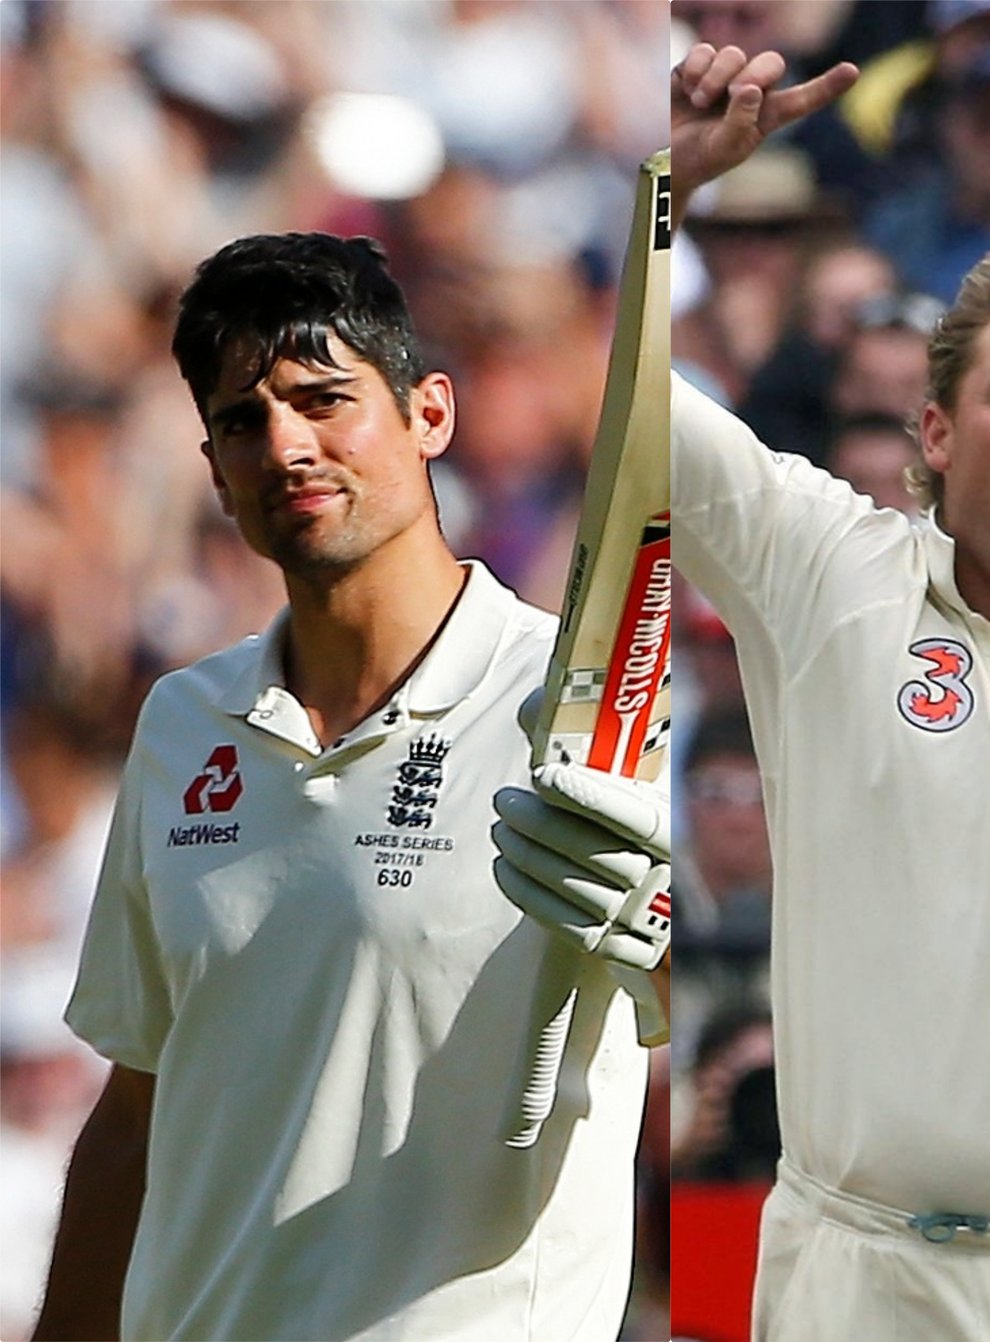 Alastair Cook and Shane Warne have starred in previous recent Boxing Day Tests at the MCG (PA)